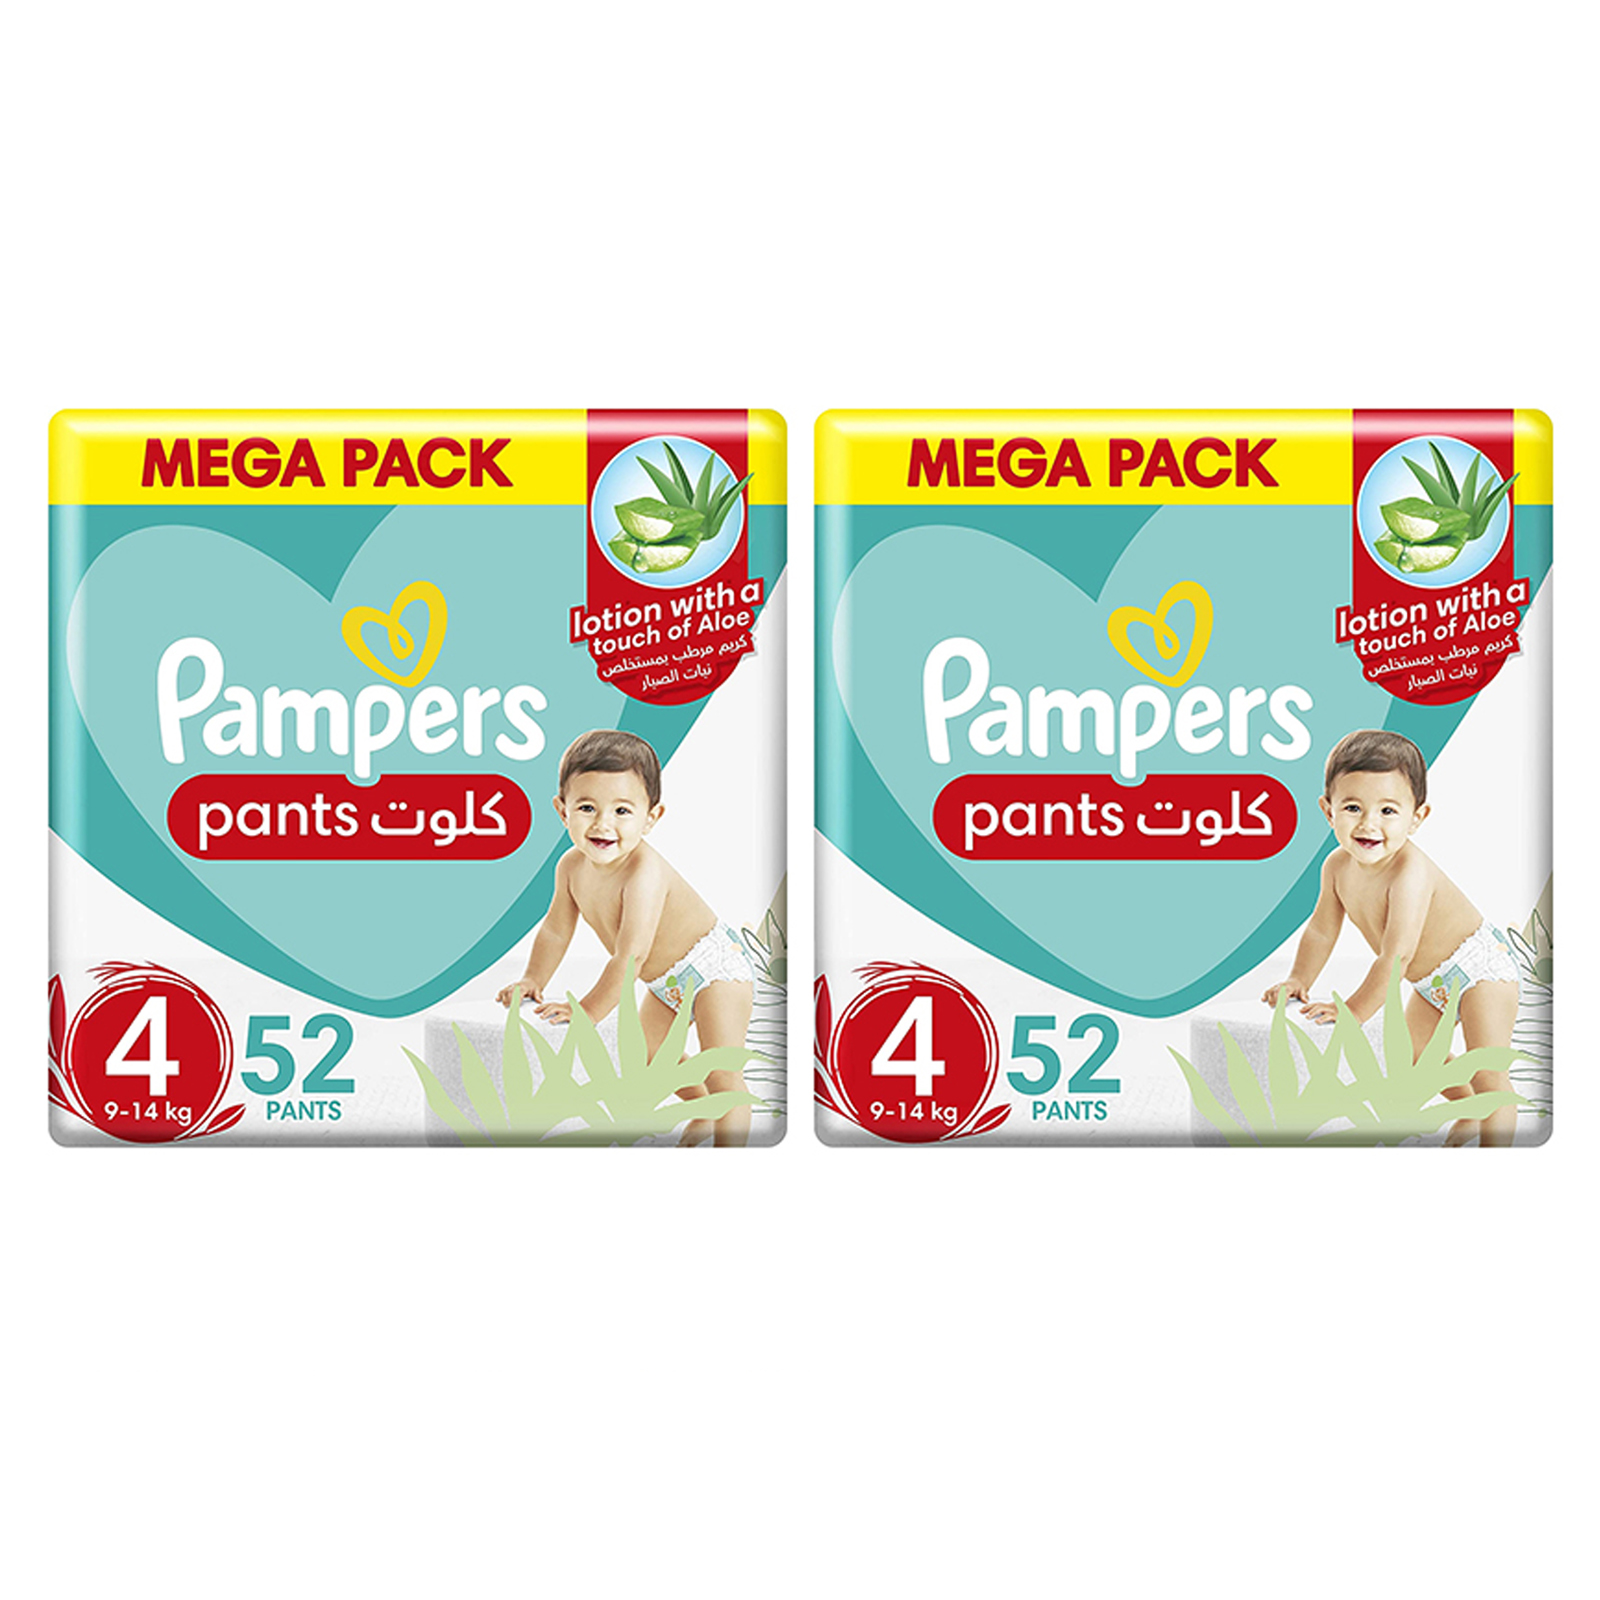 DIAPERS BABY PANTS SIZE 4, 9-14 KG PAMPERS (2 X 52 PC)